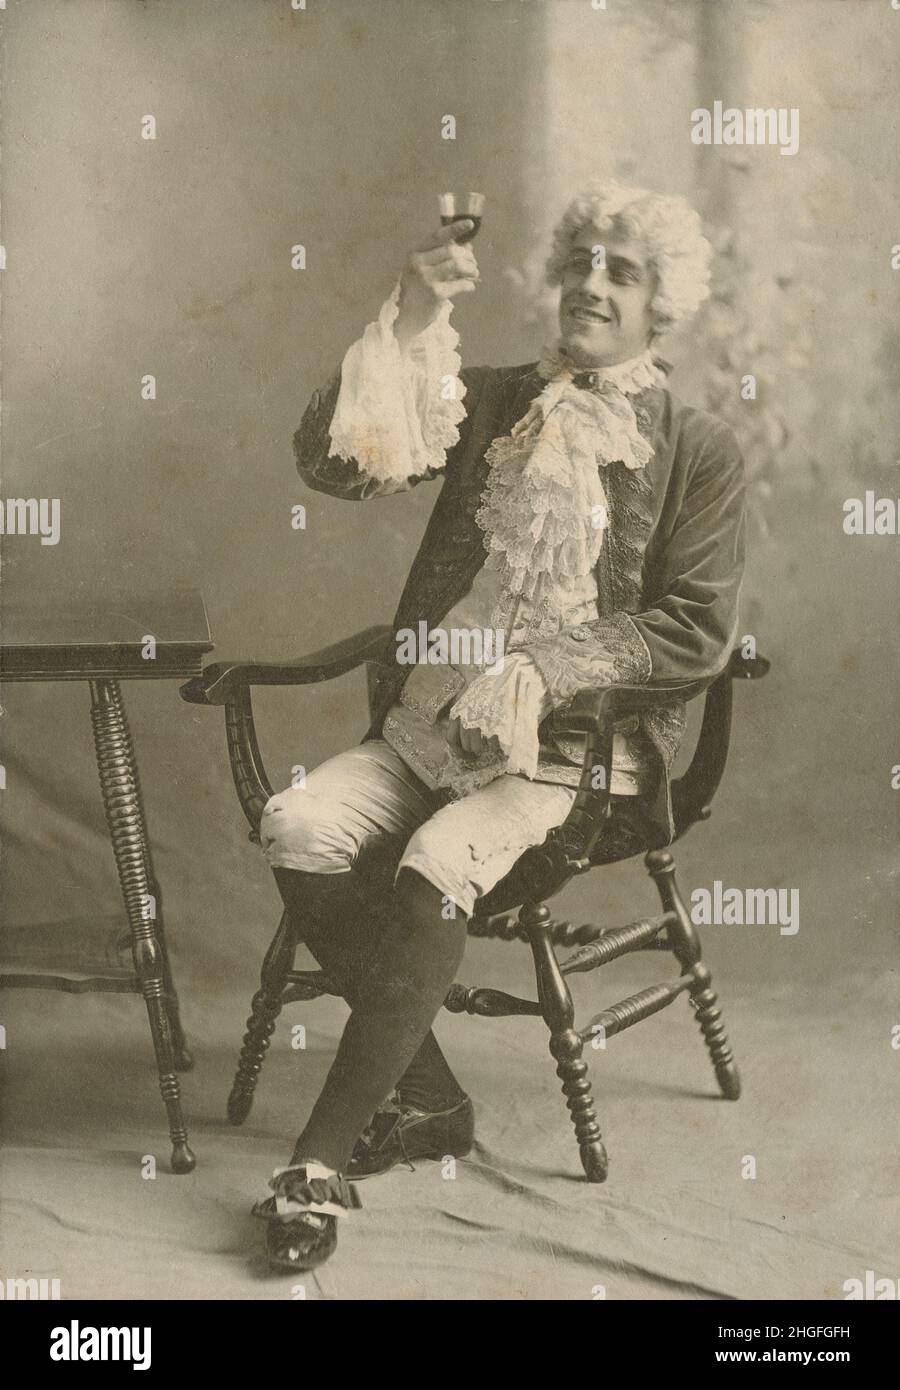 Antique circa 1910 photograph, man raising a glass dressed in period 18th century fashion with breeches, stockings, lace cravat, wig, cuffs, and shoe buckles. SOURCE: ORIGINAL PHOTOGRAPH Stock Photo